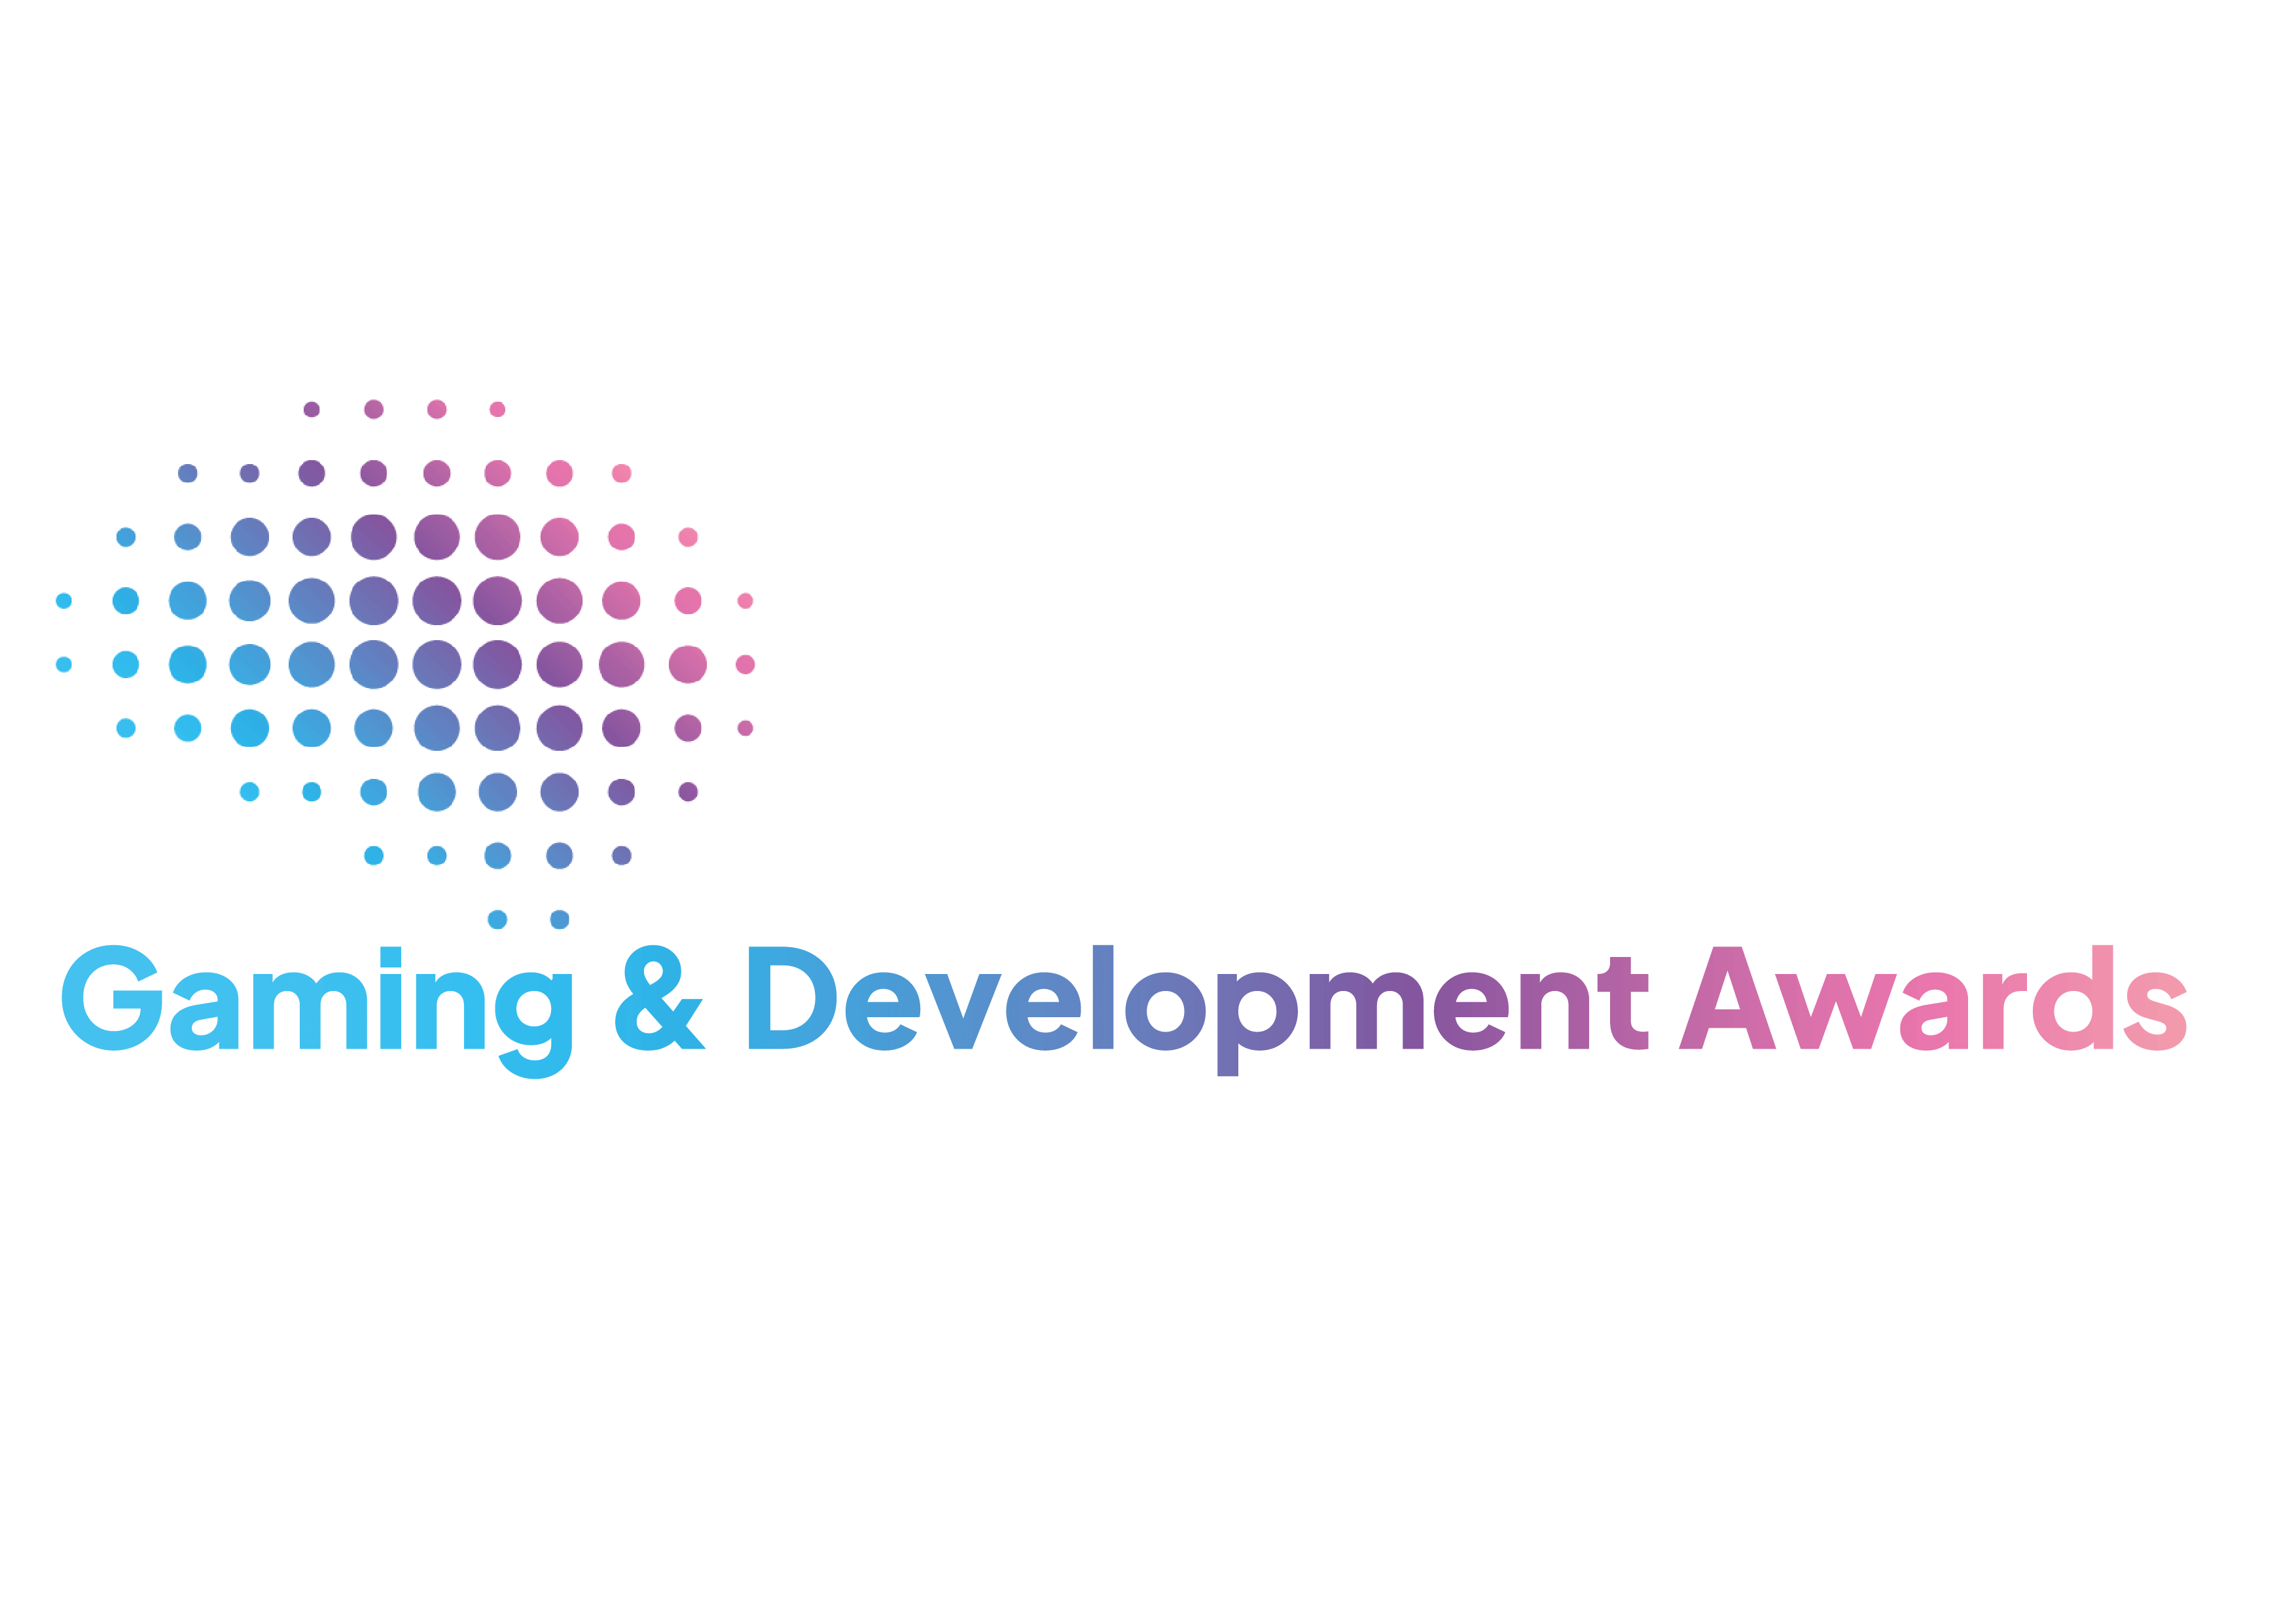 Gaming and Development Awards